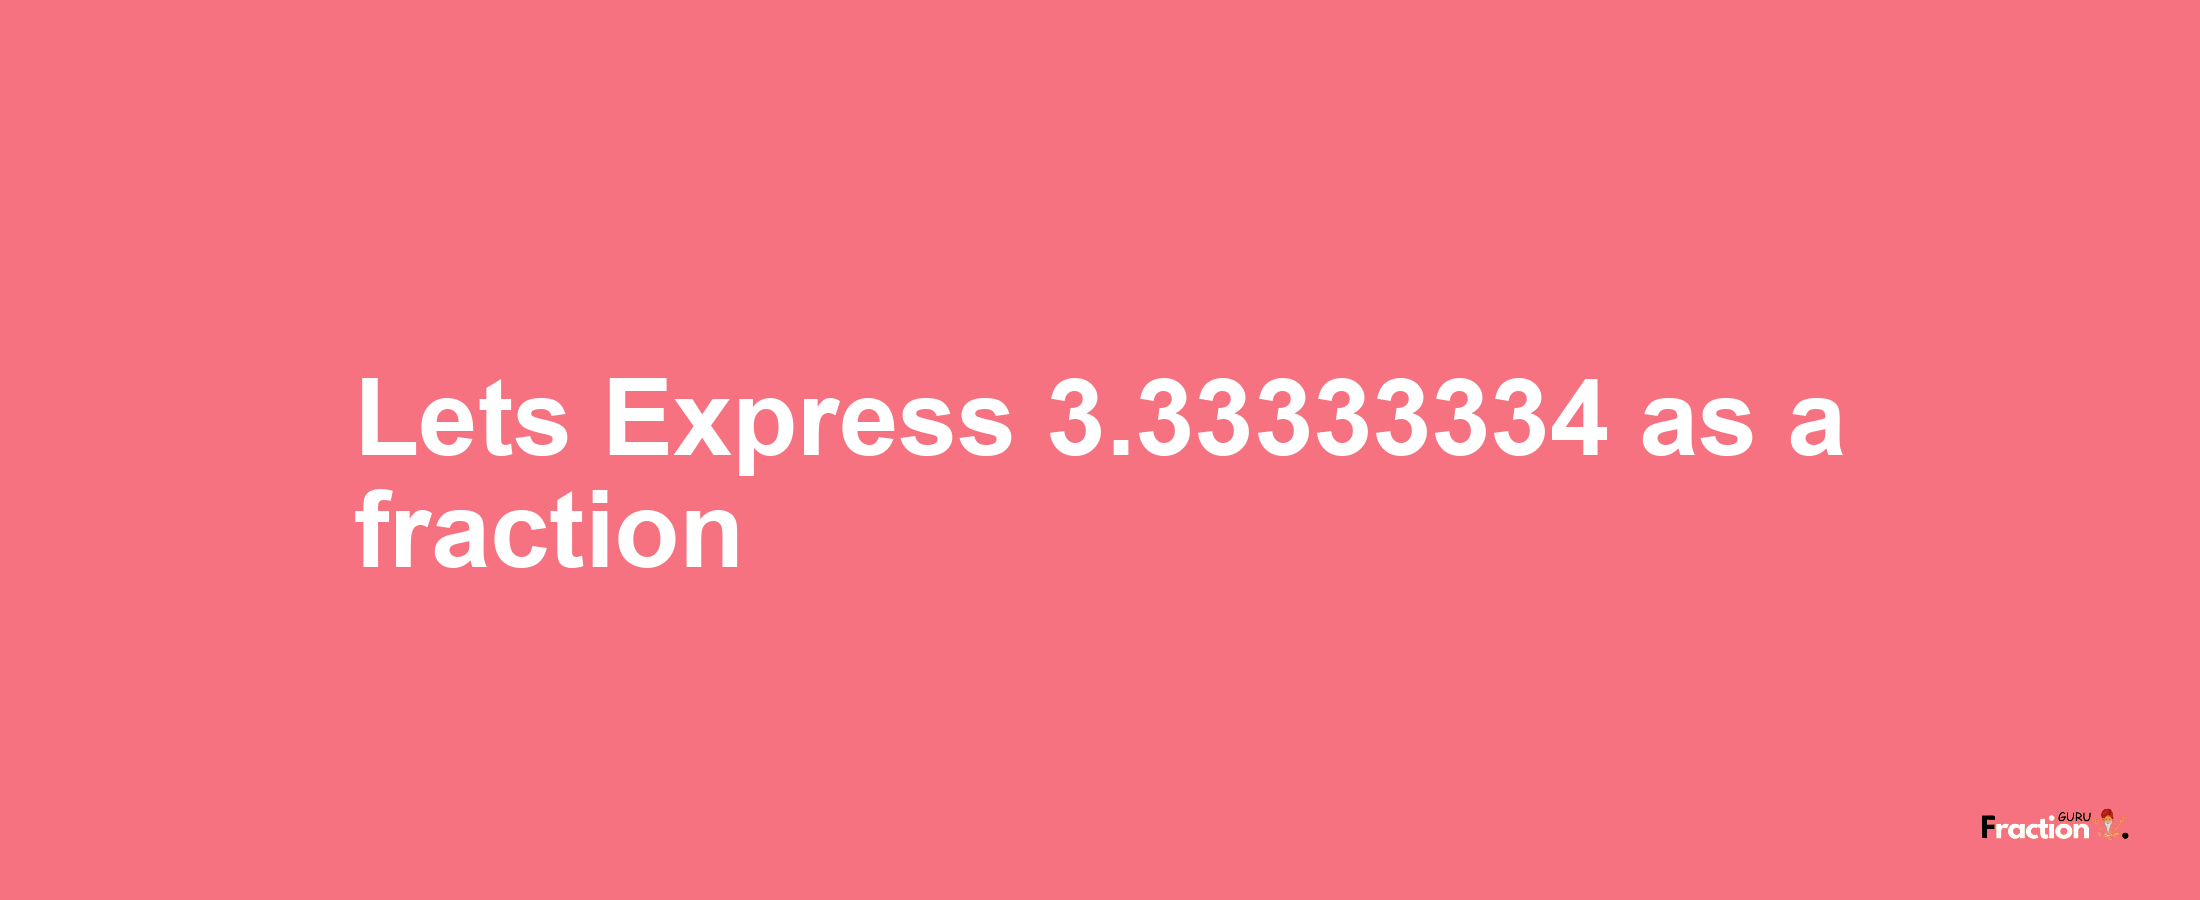 Lets Express 3.33333334 as afraction